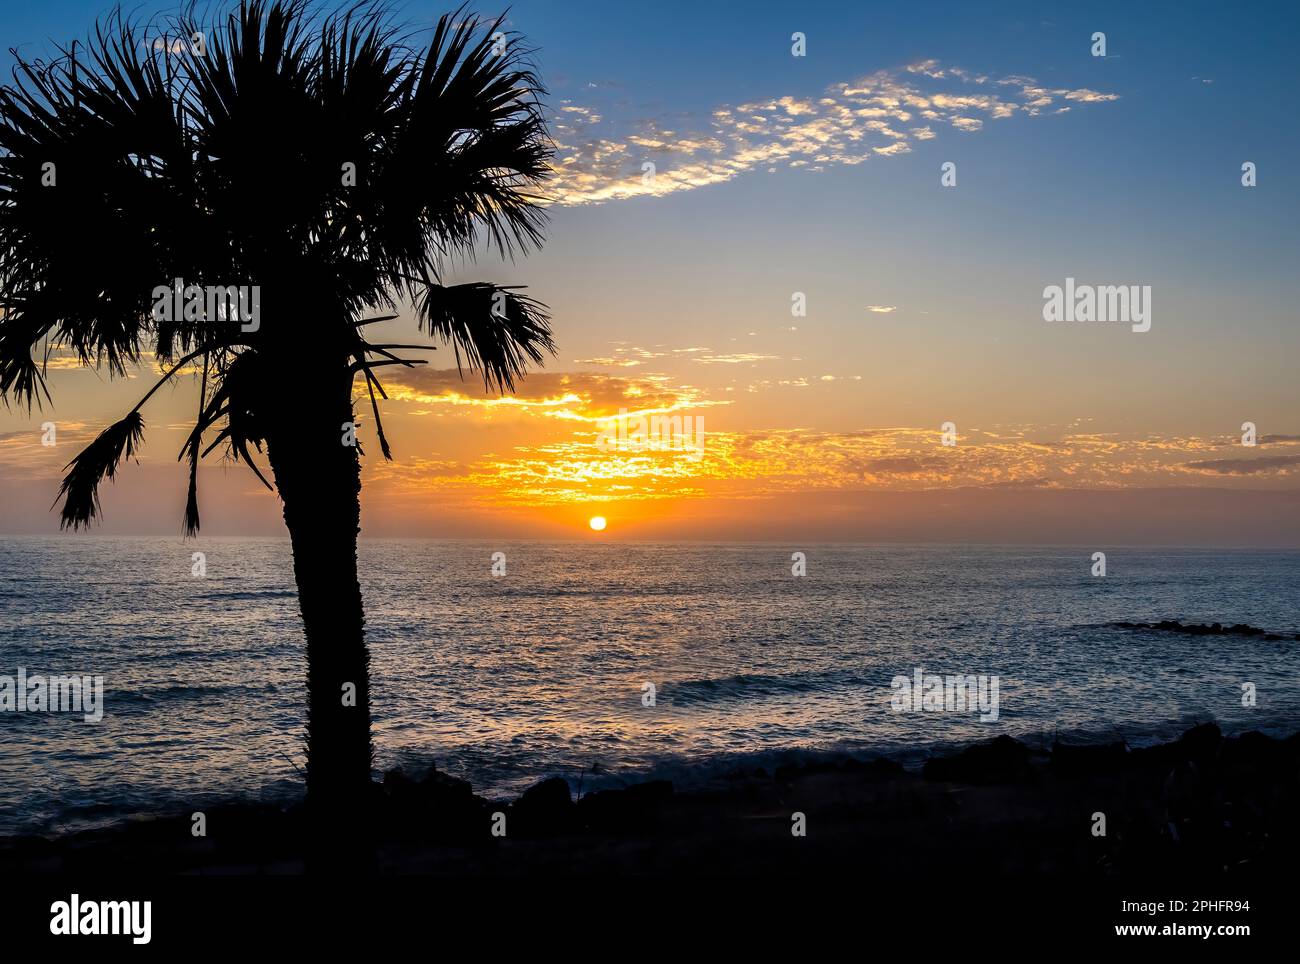 Palm trees silhouetted aganist an orange and blue sunset sky  over the Gulf of Mexico at Caspersen Beach in Venice Florida USA Stock Photo